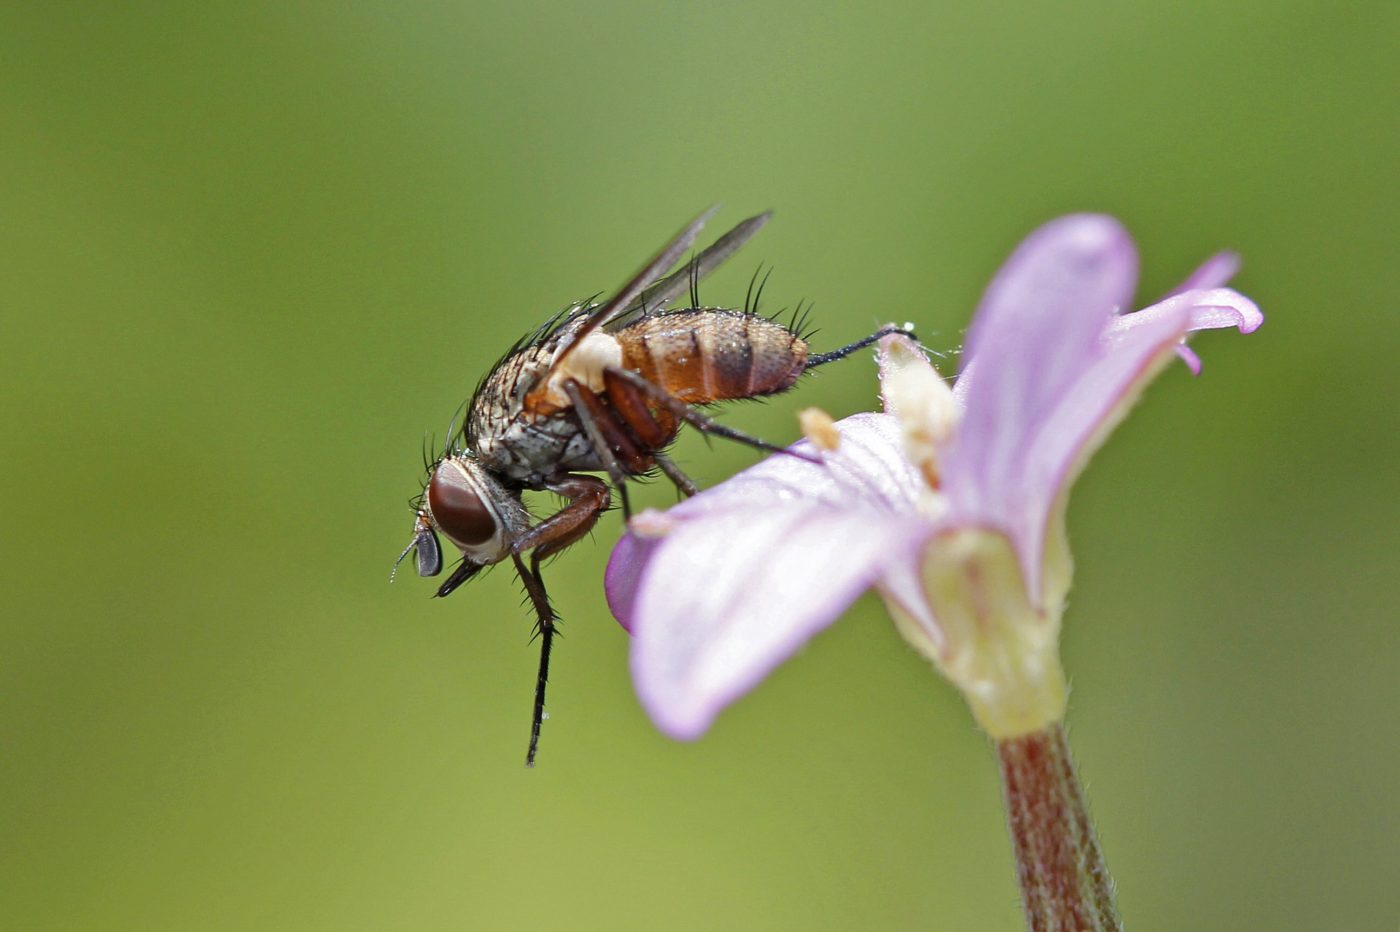 An unidentified fly in the photographer’s back garden in Suffolk in late June 2014.